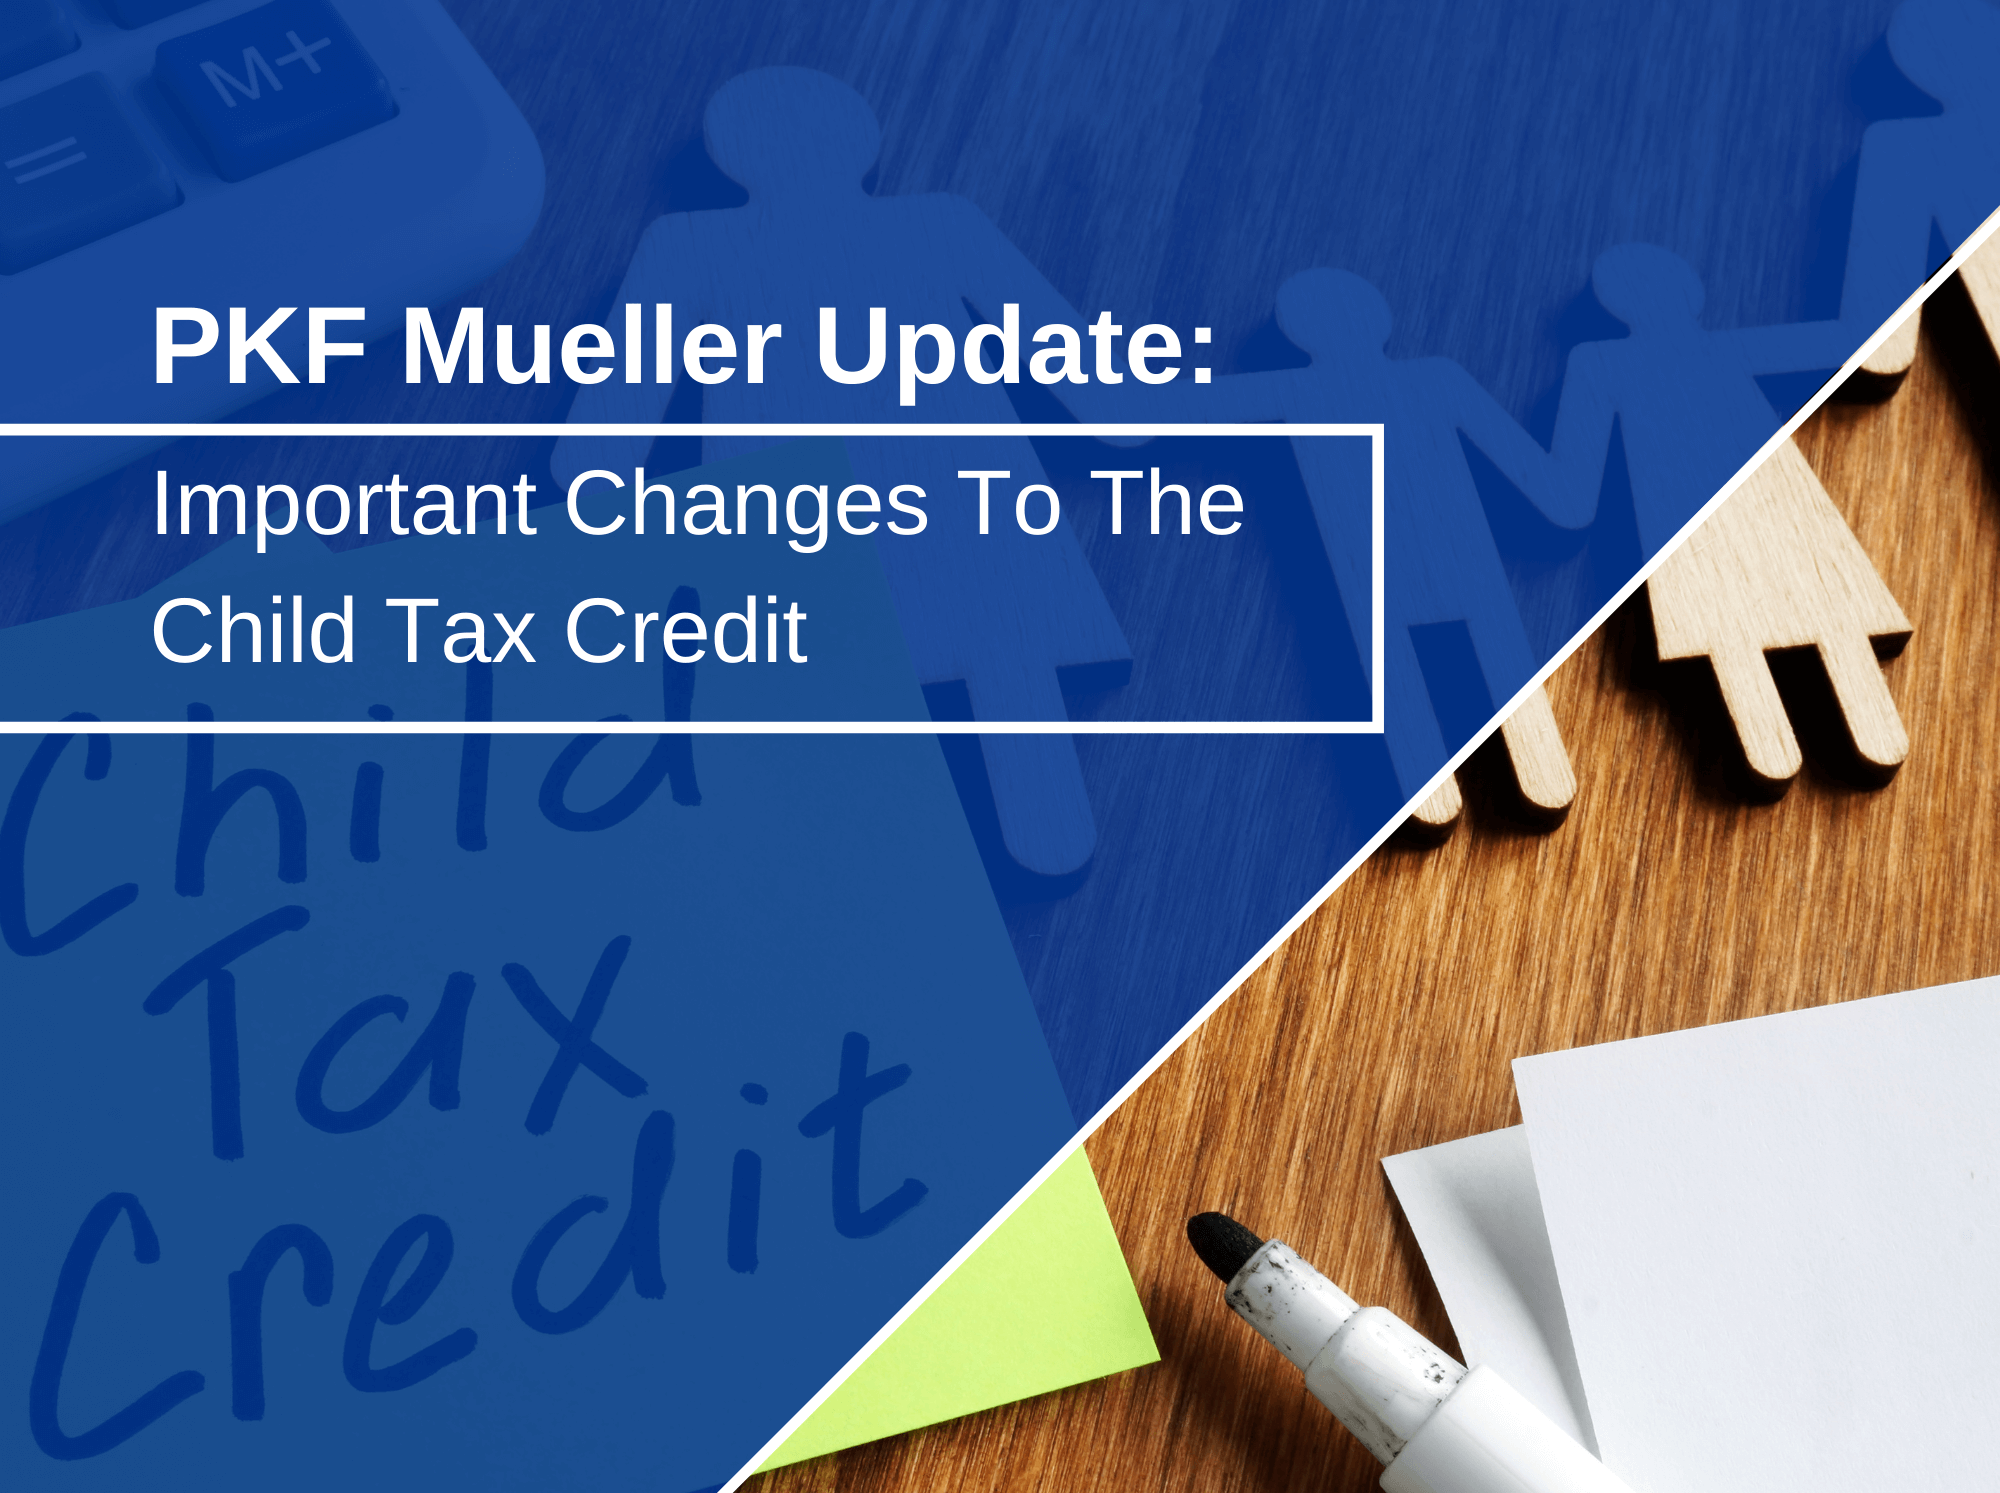 Imperative Changes to the Child Tax Credit